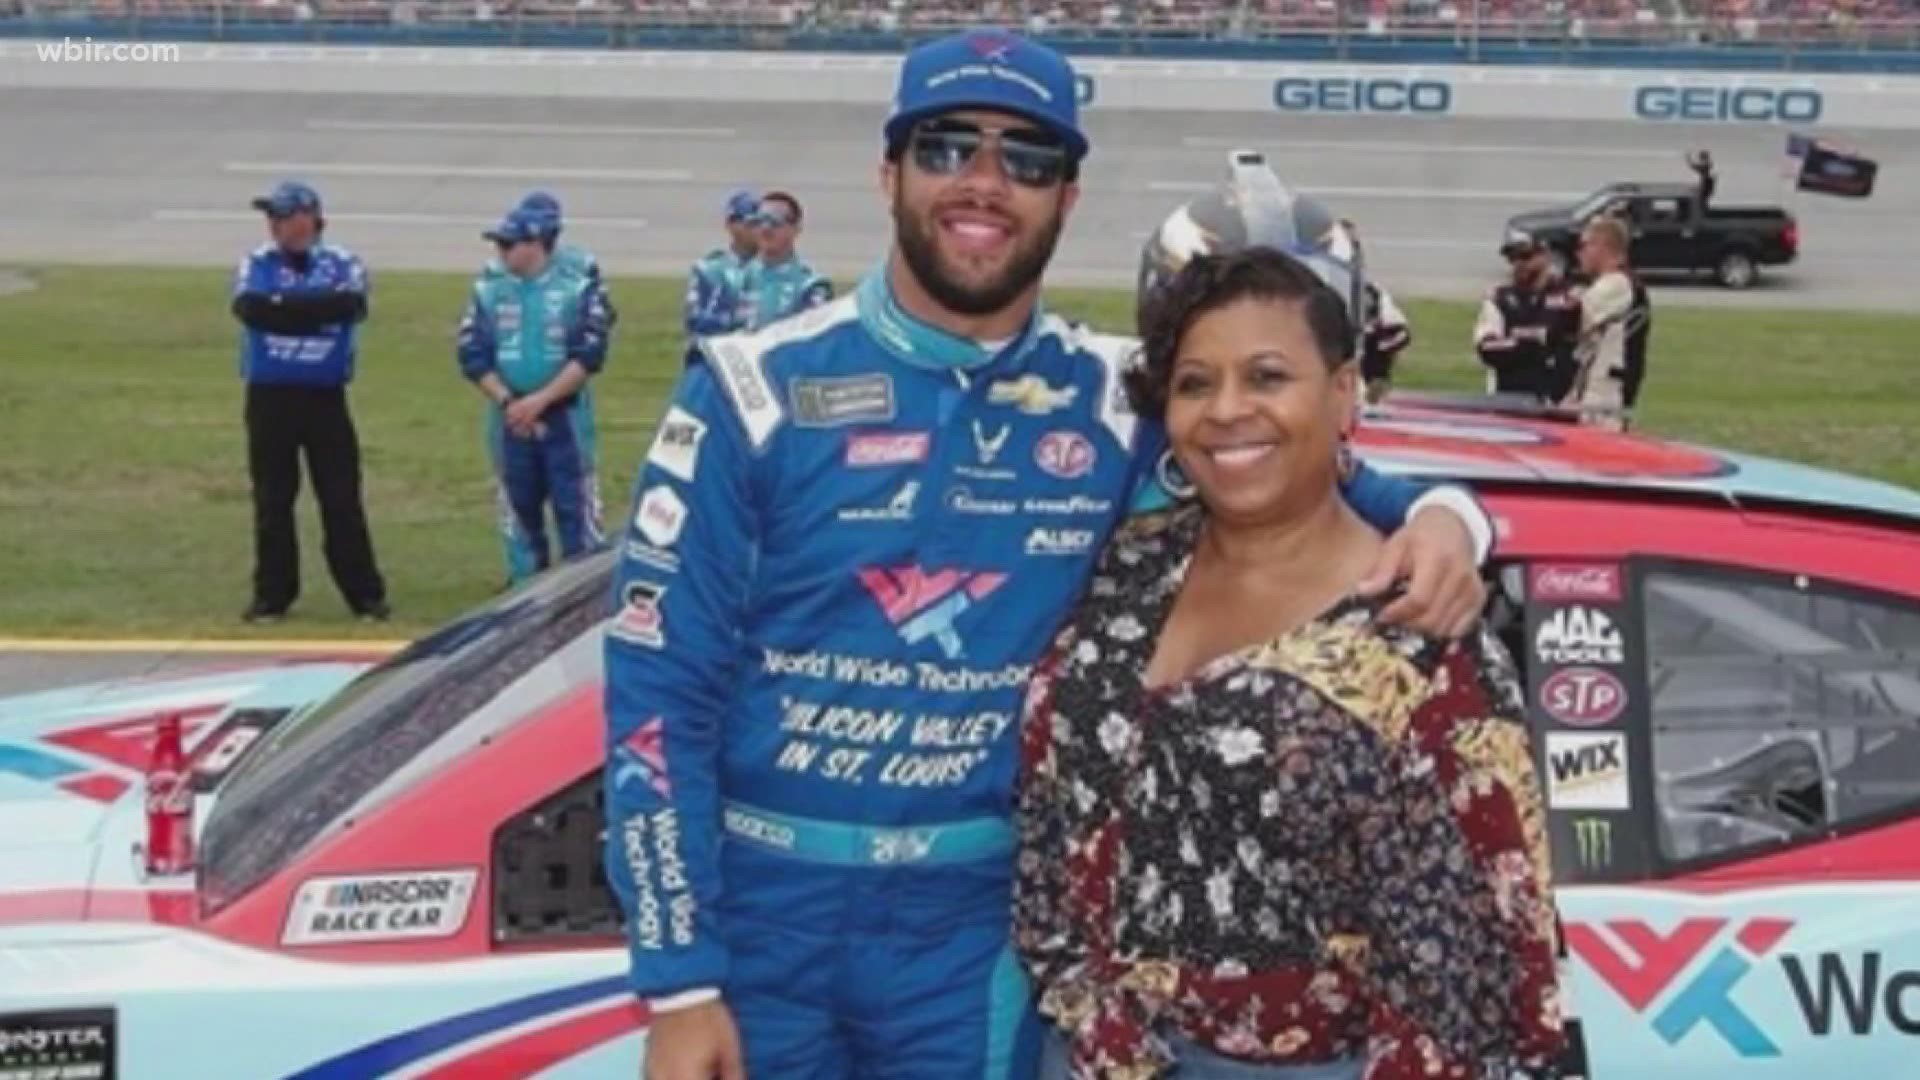 The Department of Justice and the FBI are investigating after a noose was found in the Talladega garage stall of NASCAR driver Bubba Wallace.